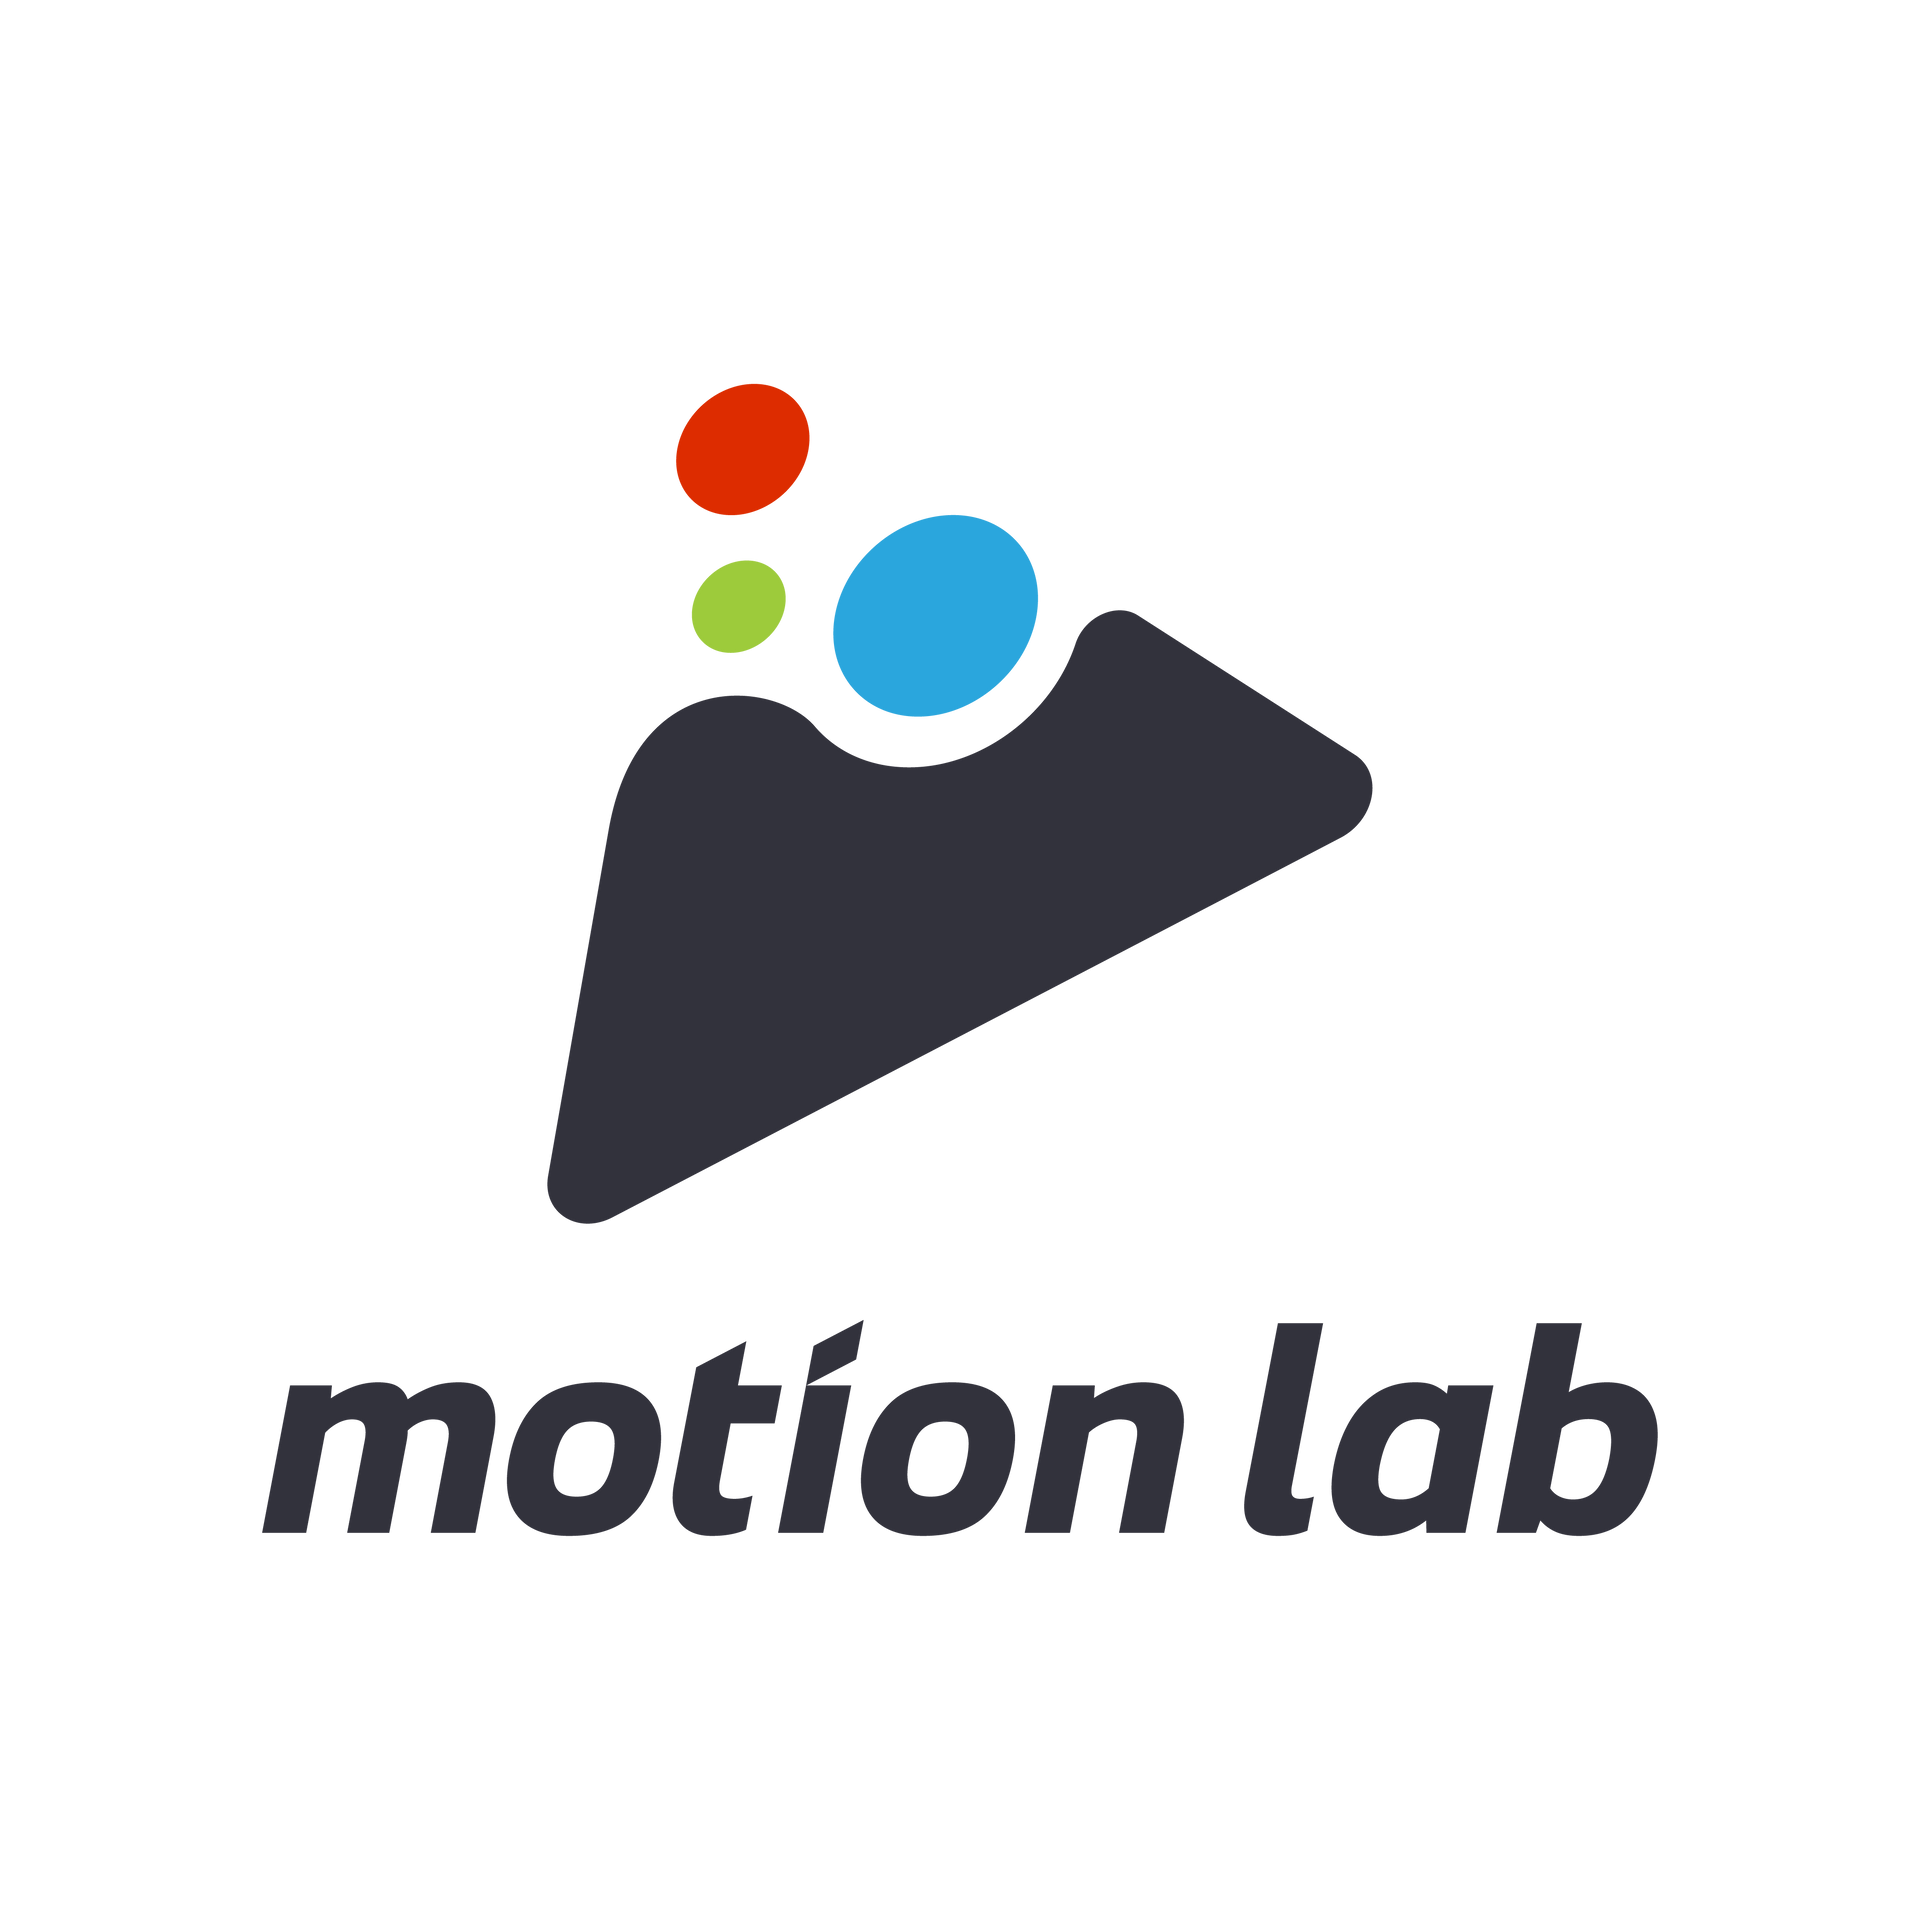 A logo for a company called motion lab with a mountain and circles on it.